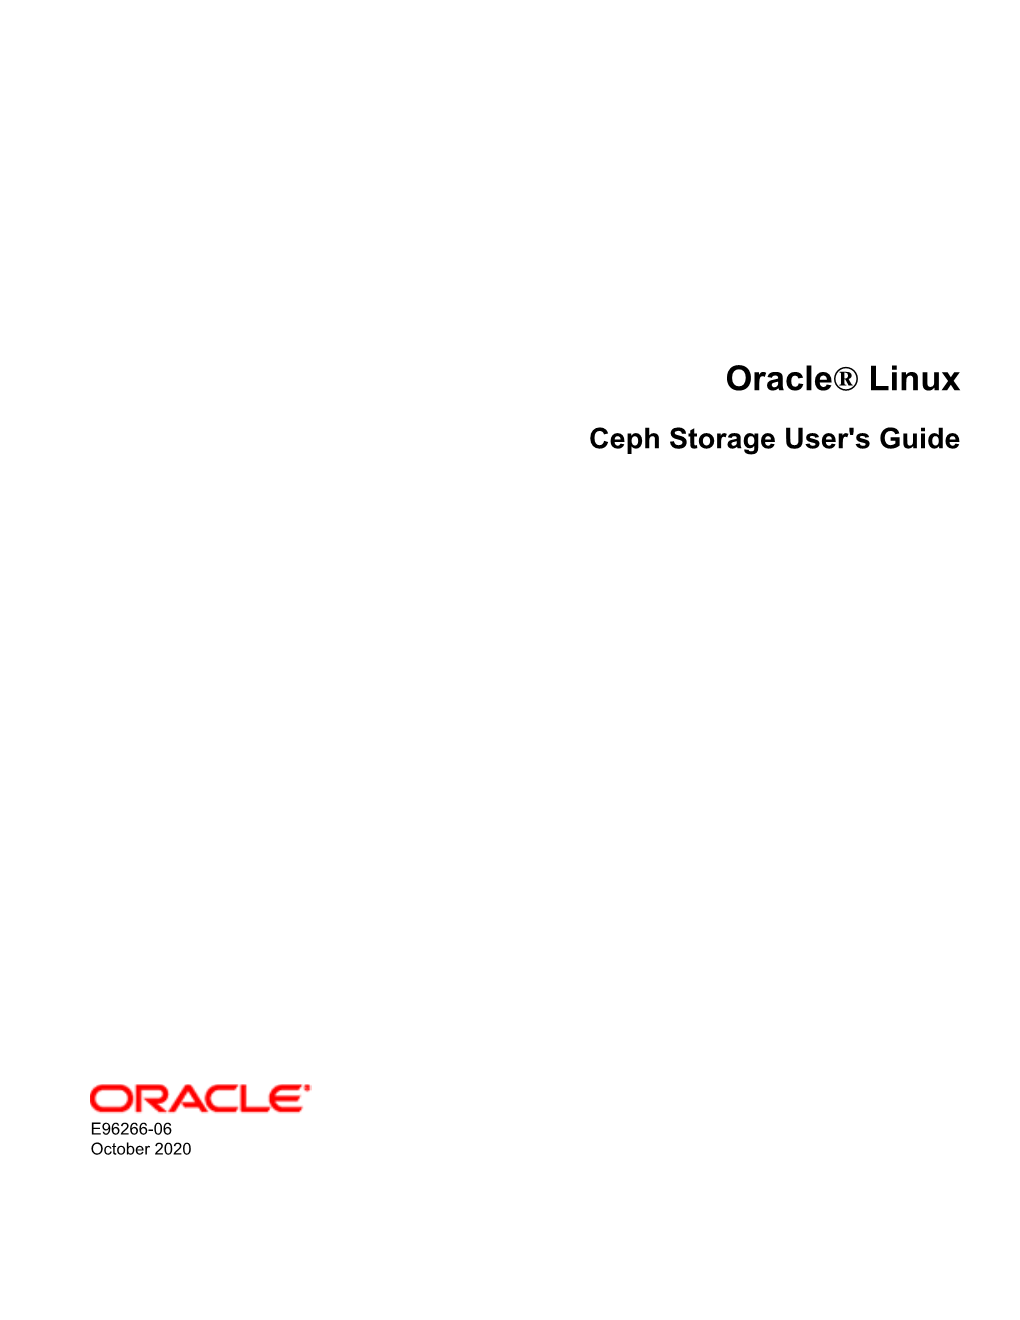 Oracle® Linux Ceph Storage User's Guide